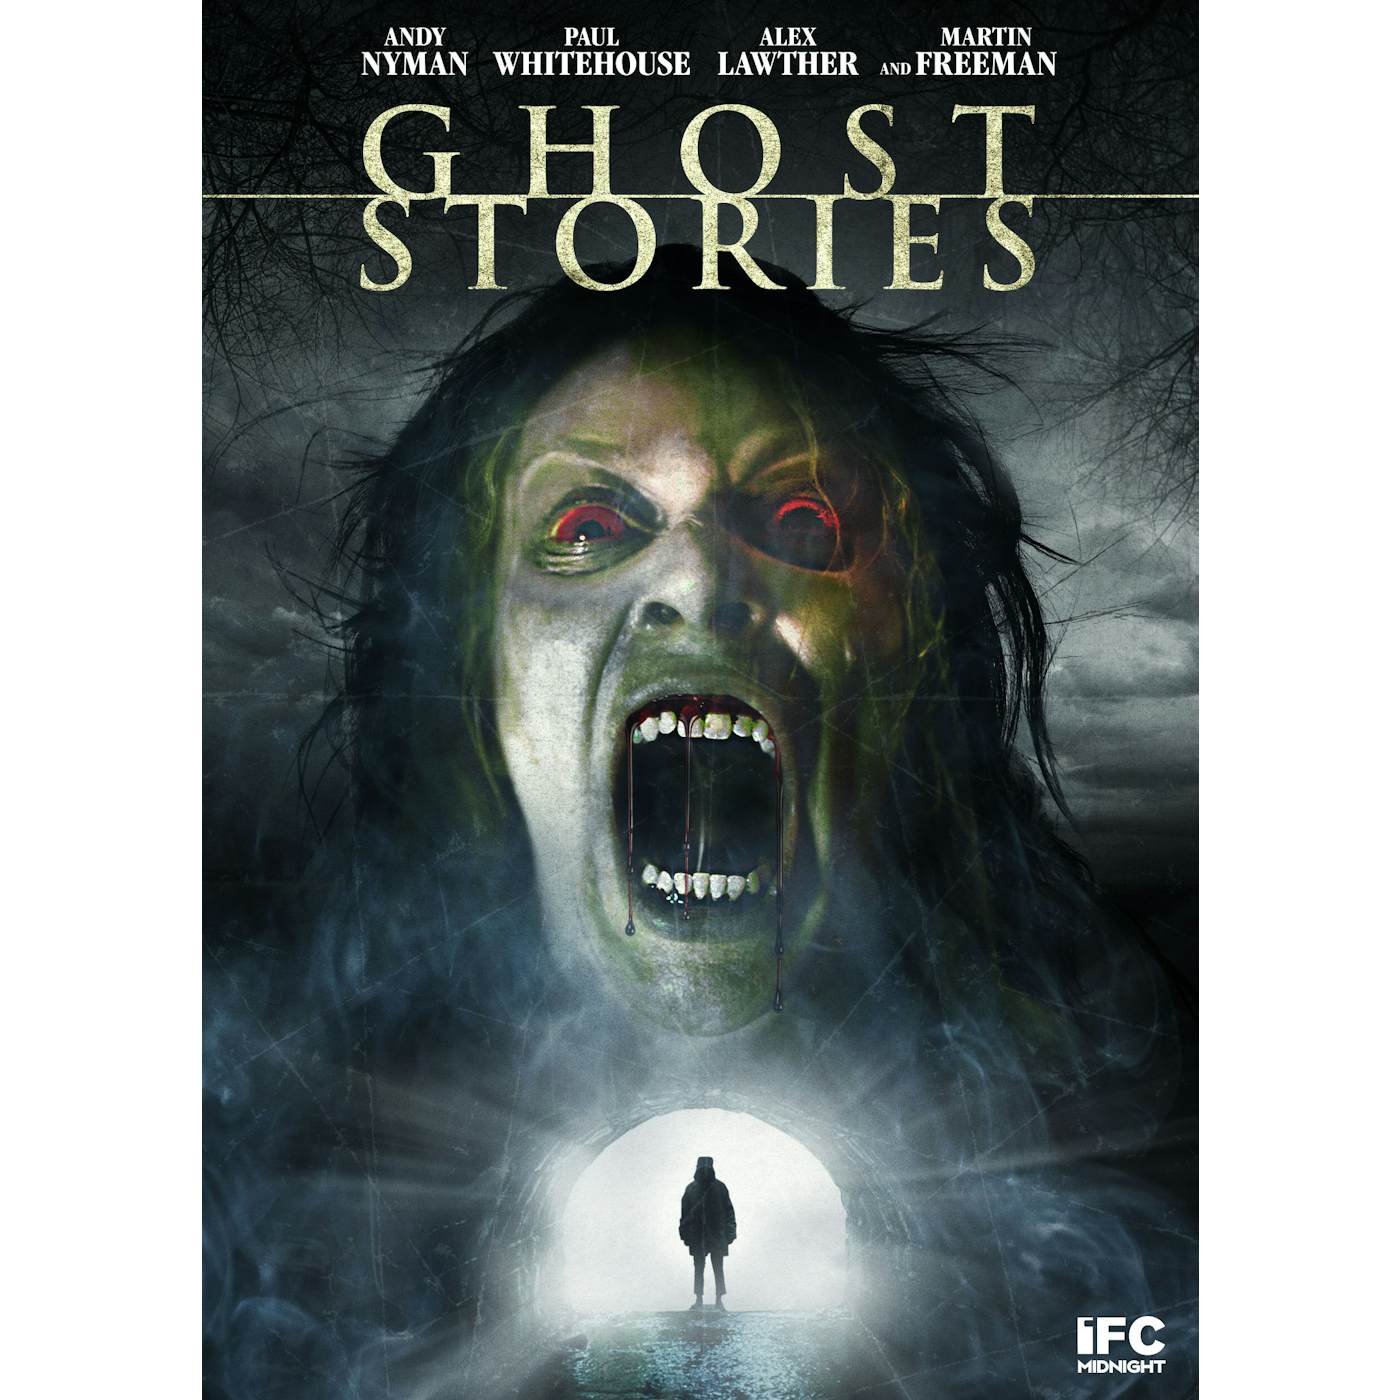 GHOST STORIES DVD